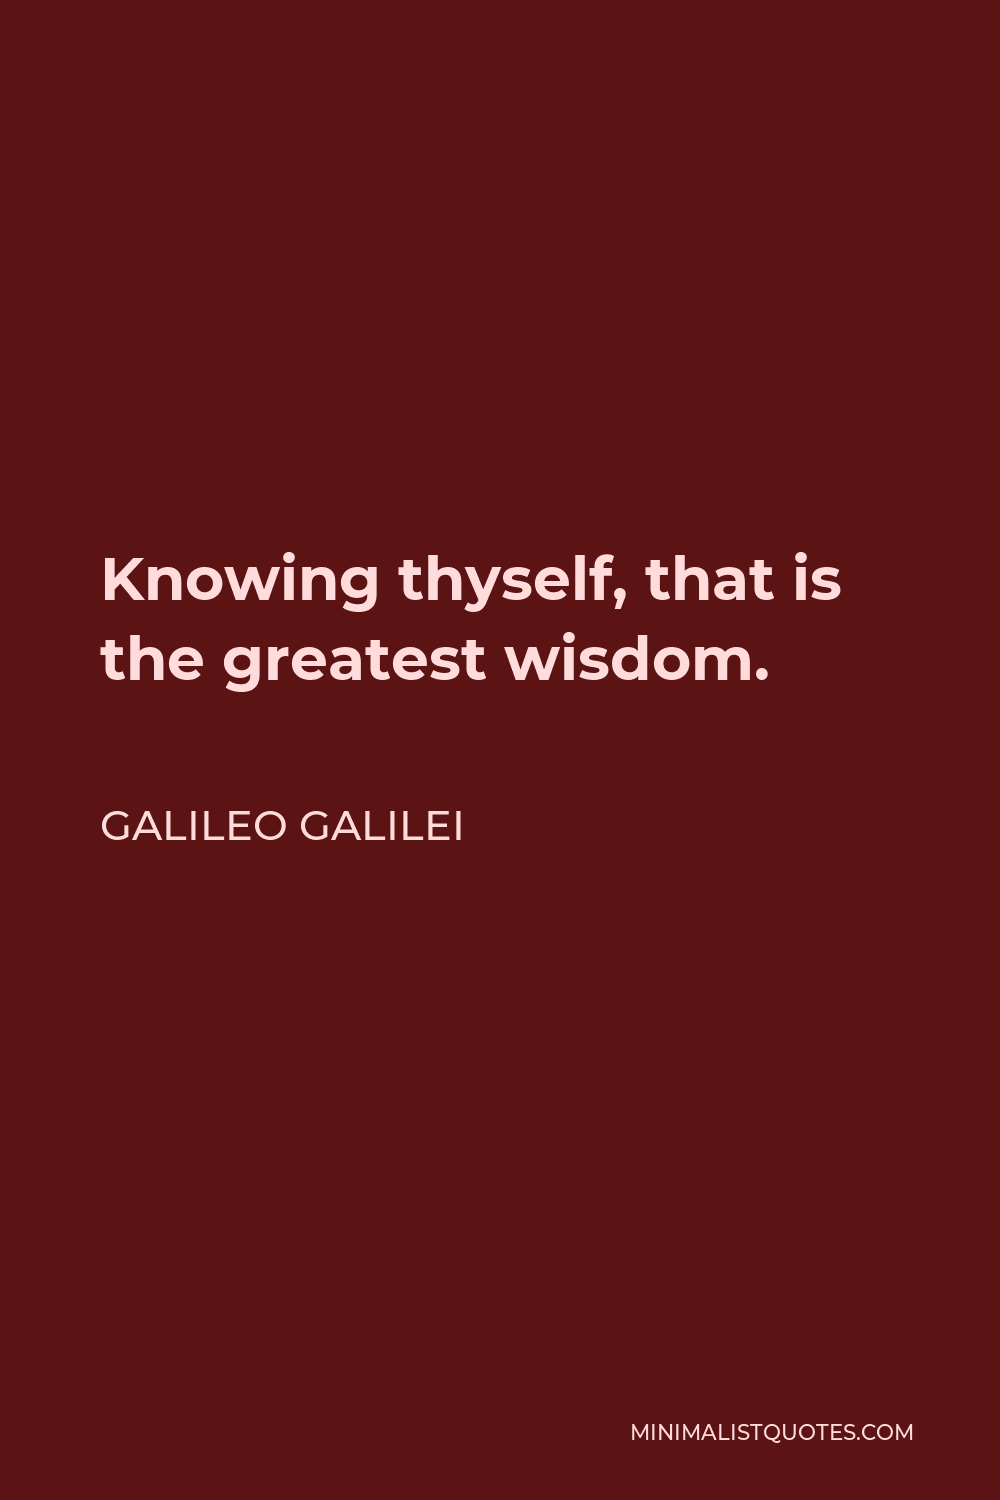 Galileo Galilei Quote - Knowing thyself, that is the greatest wisdom.